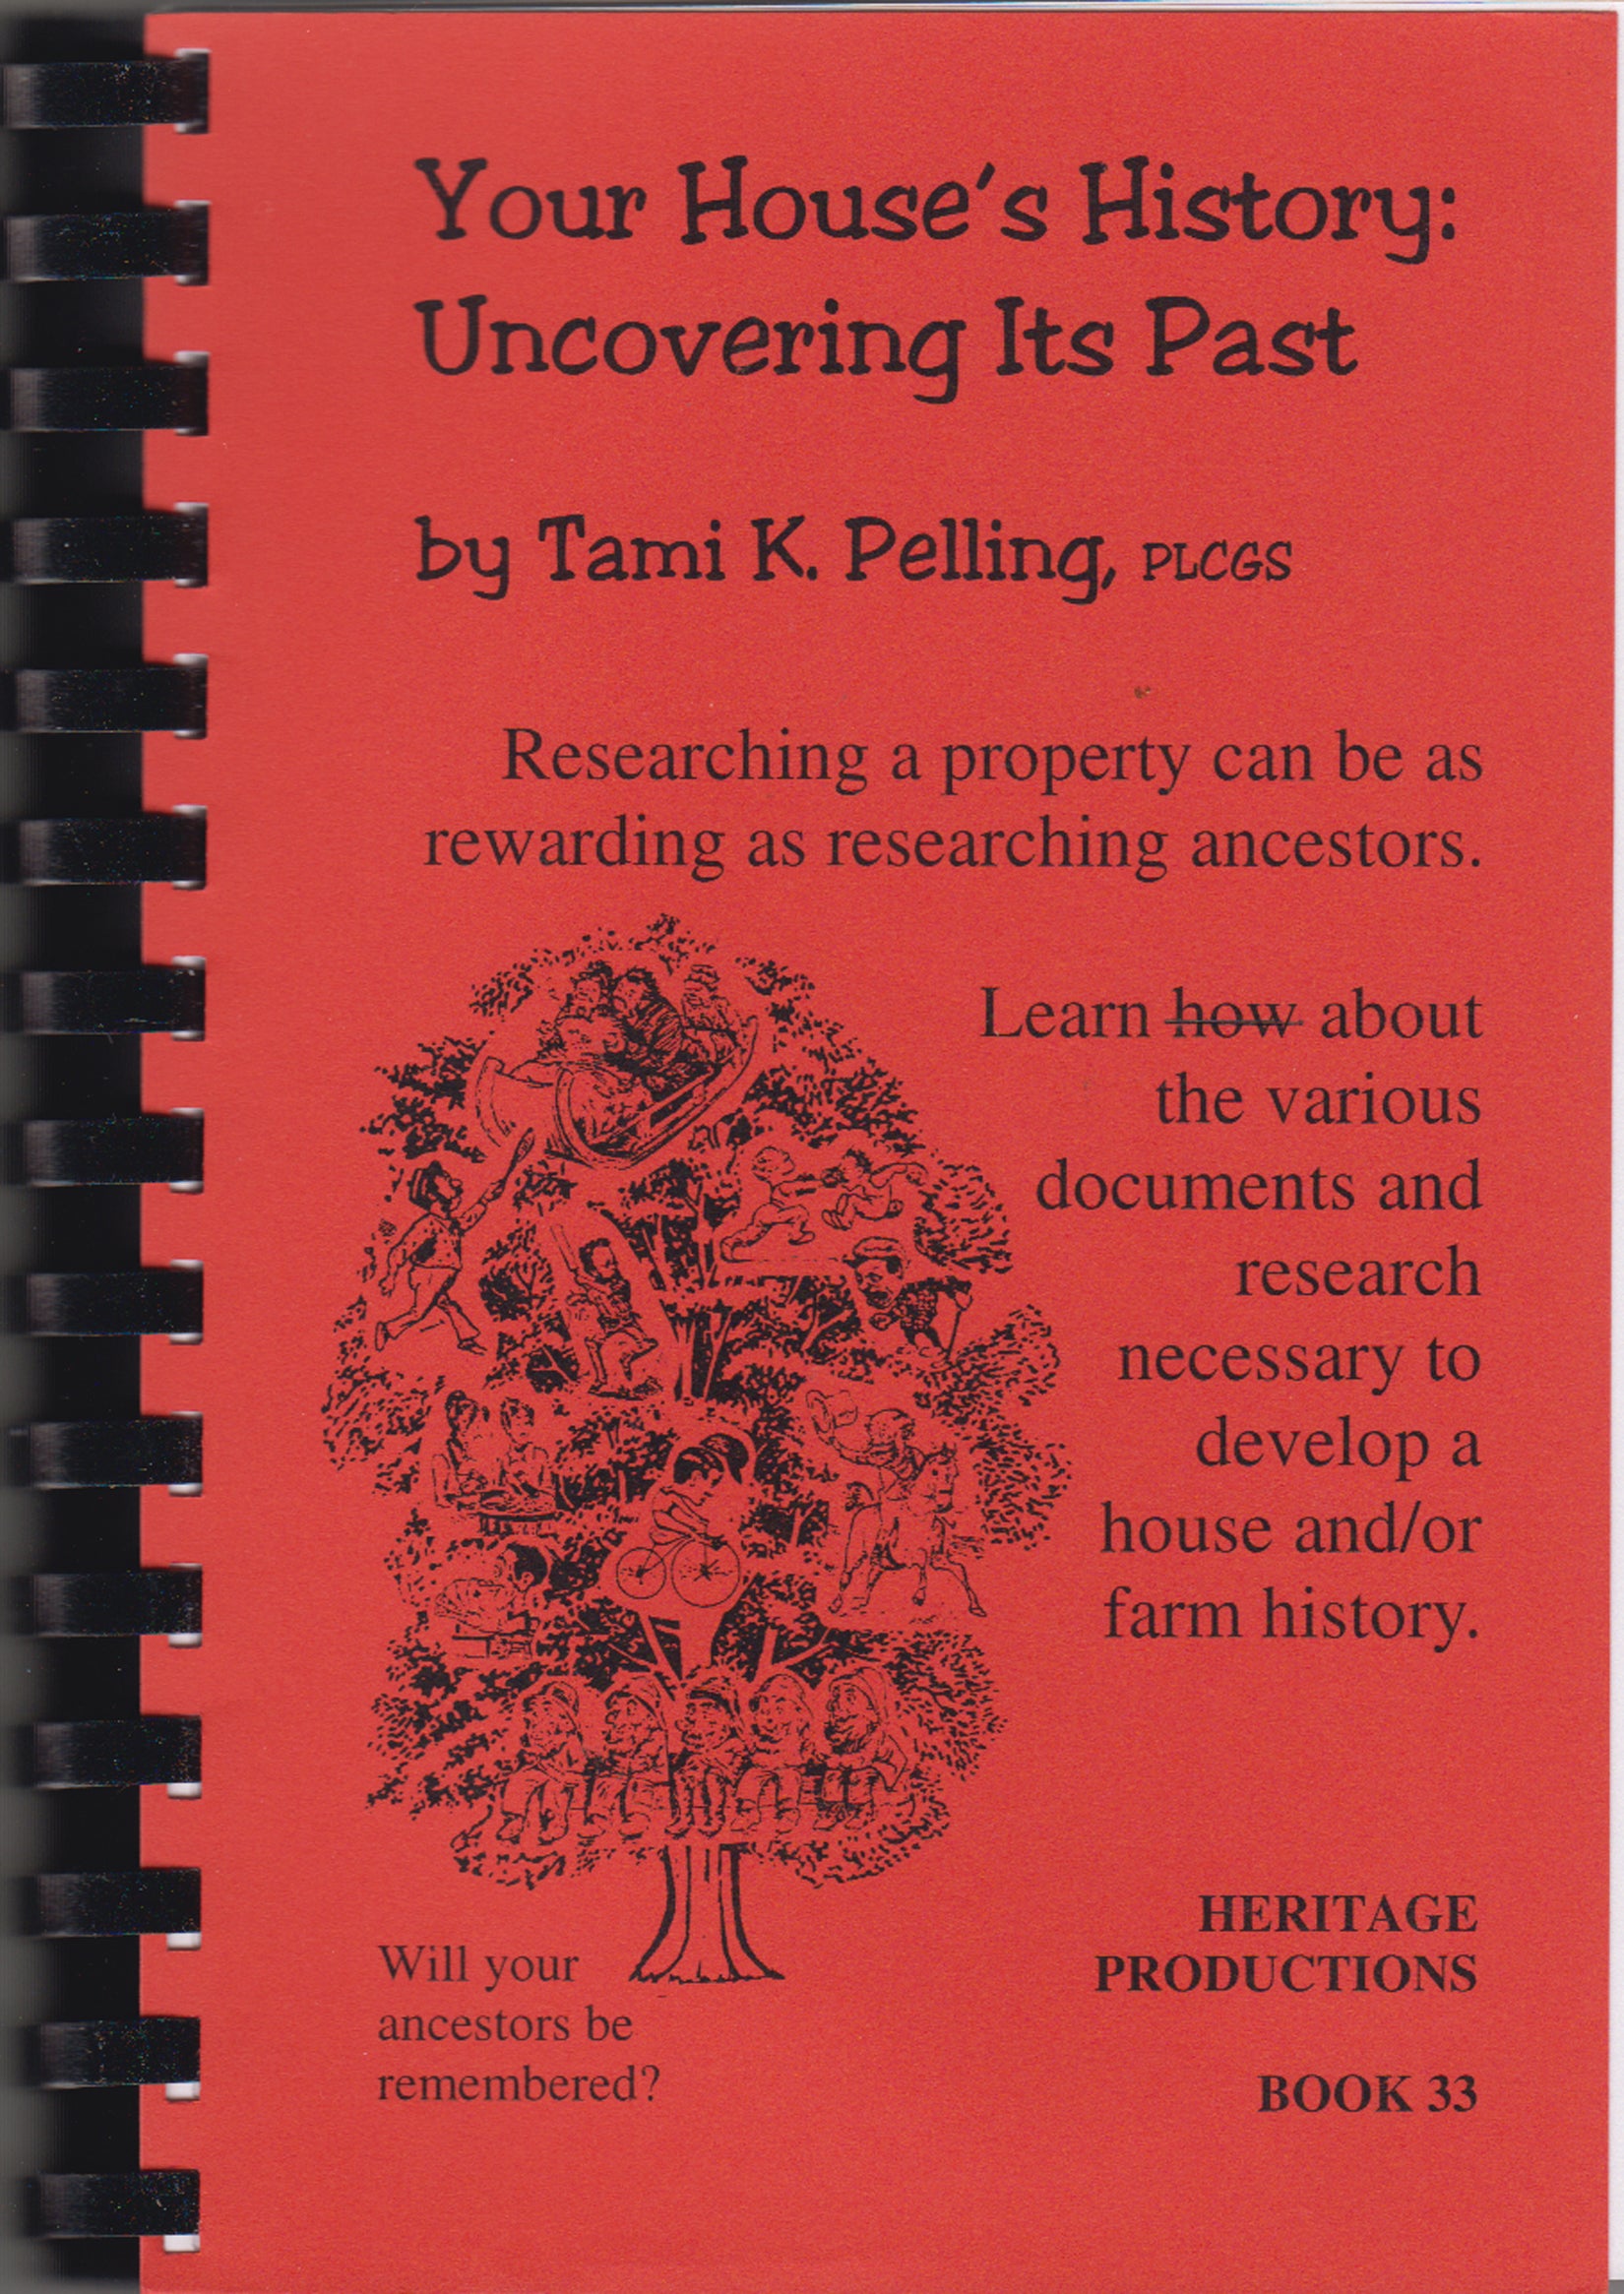 Your House’s History: Uncovering Its Past